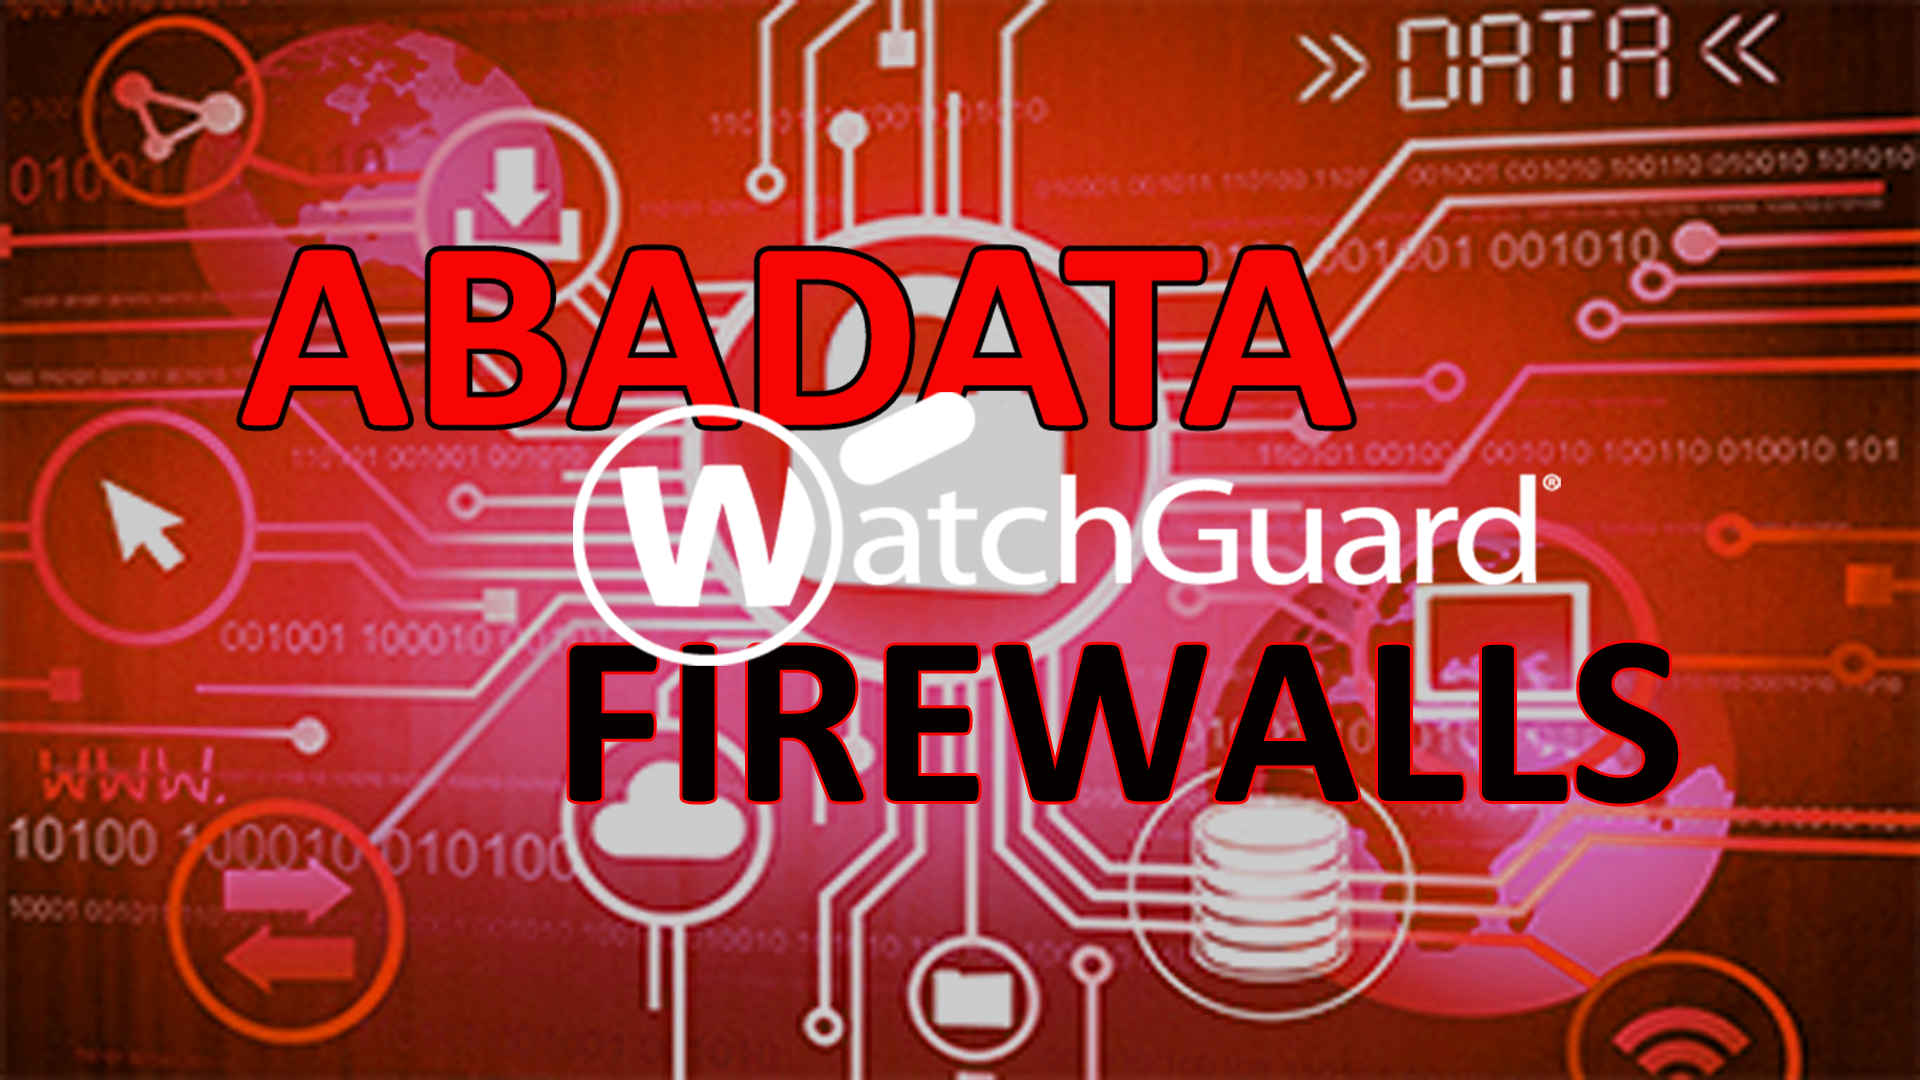 Network Security, (WatchGuard) Firewalls - don't worry - we can help!